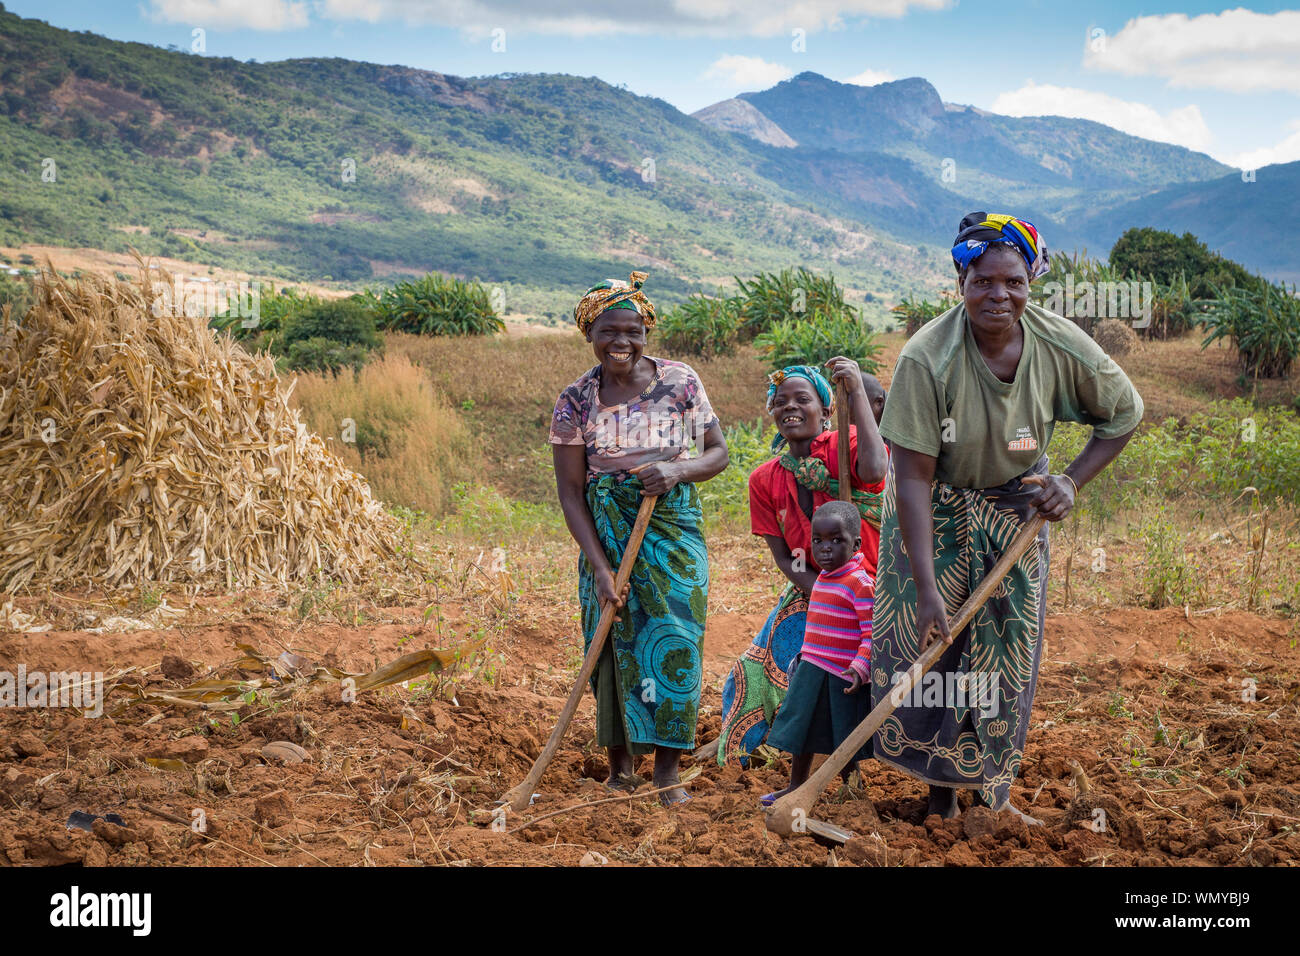 Women farmers demonstrate land preparation and sustainable agriculture in Mzimba district, Malawi Stock Photo